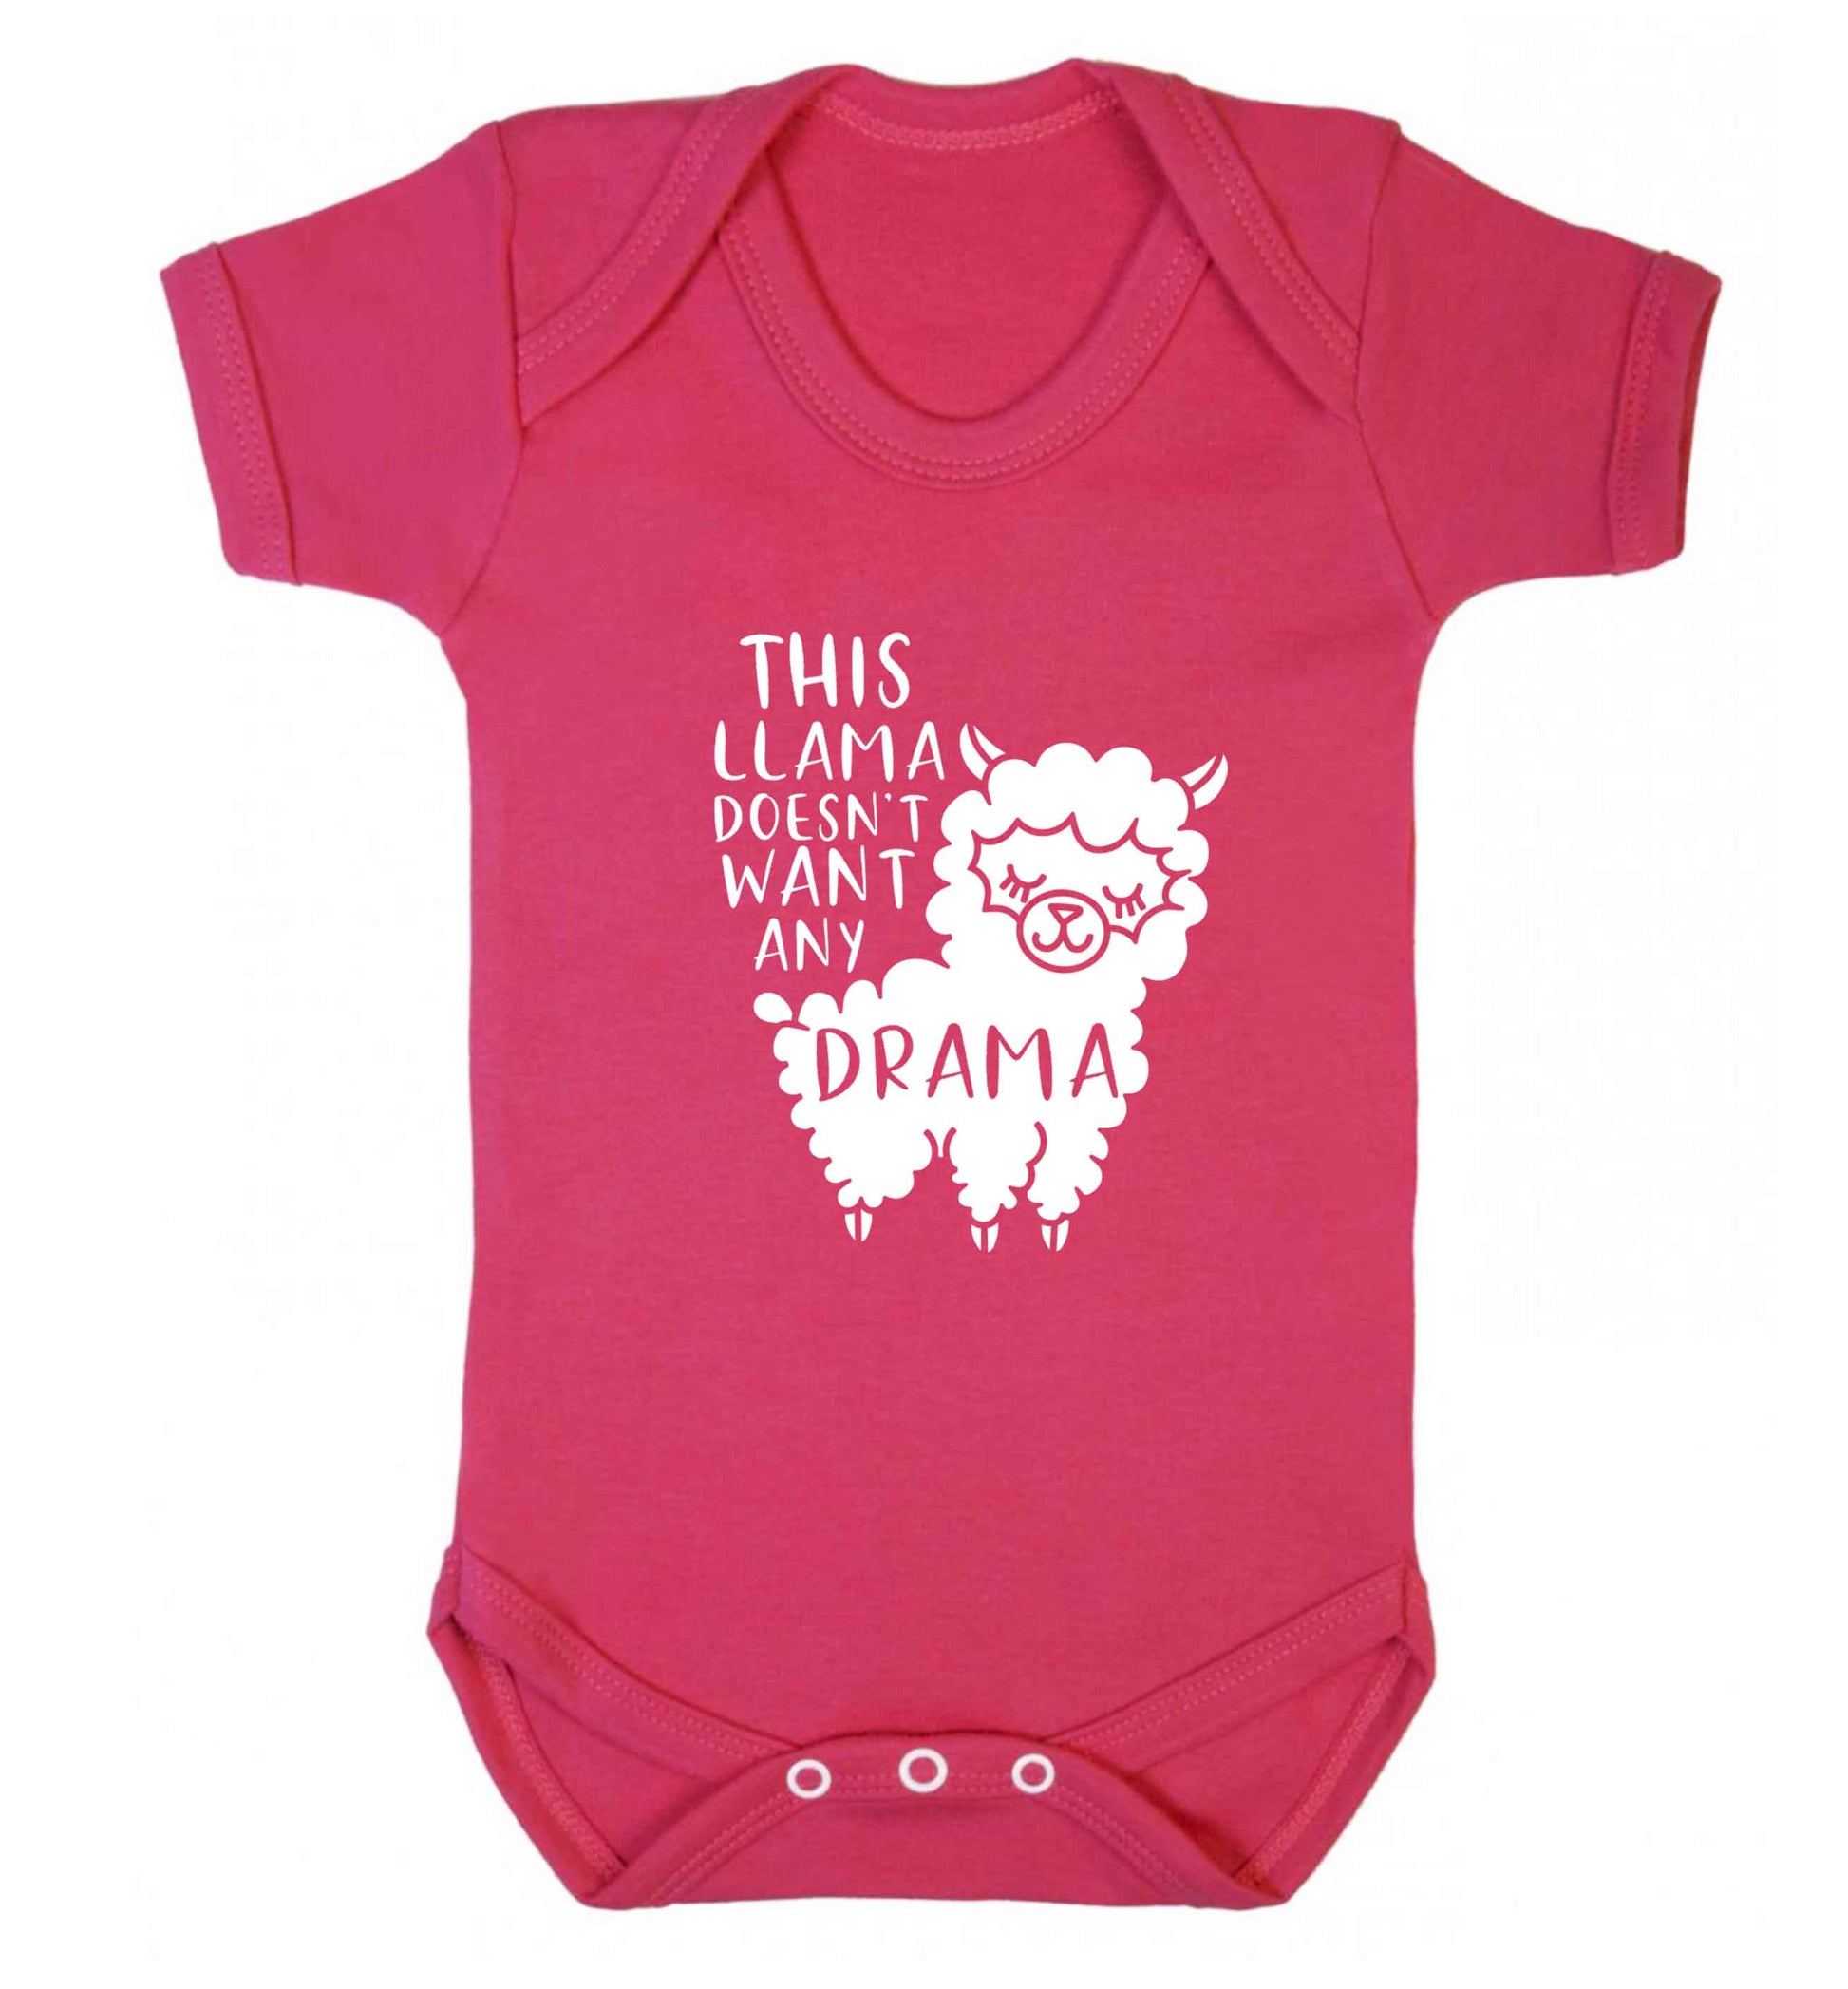 This Llama doesn't want any drama baby vest dark pink 18-24 months